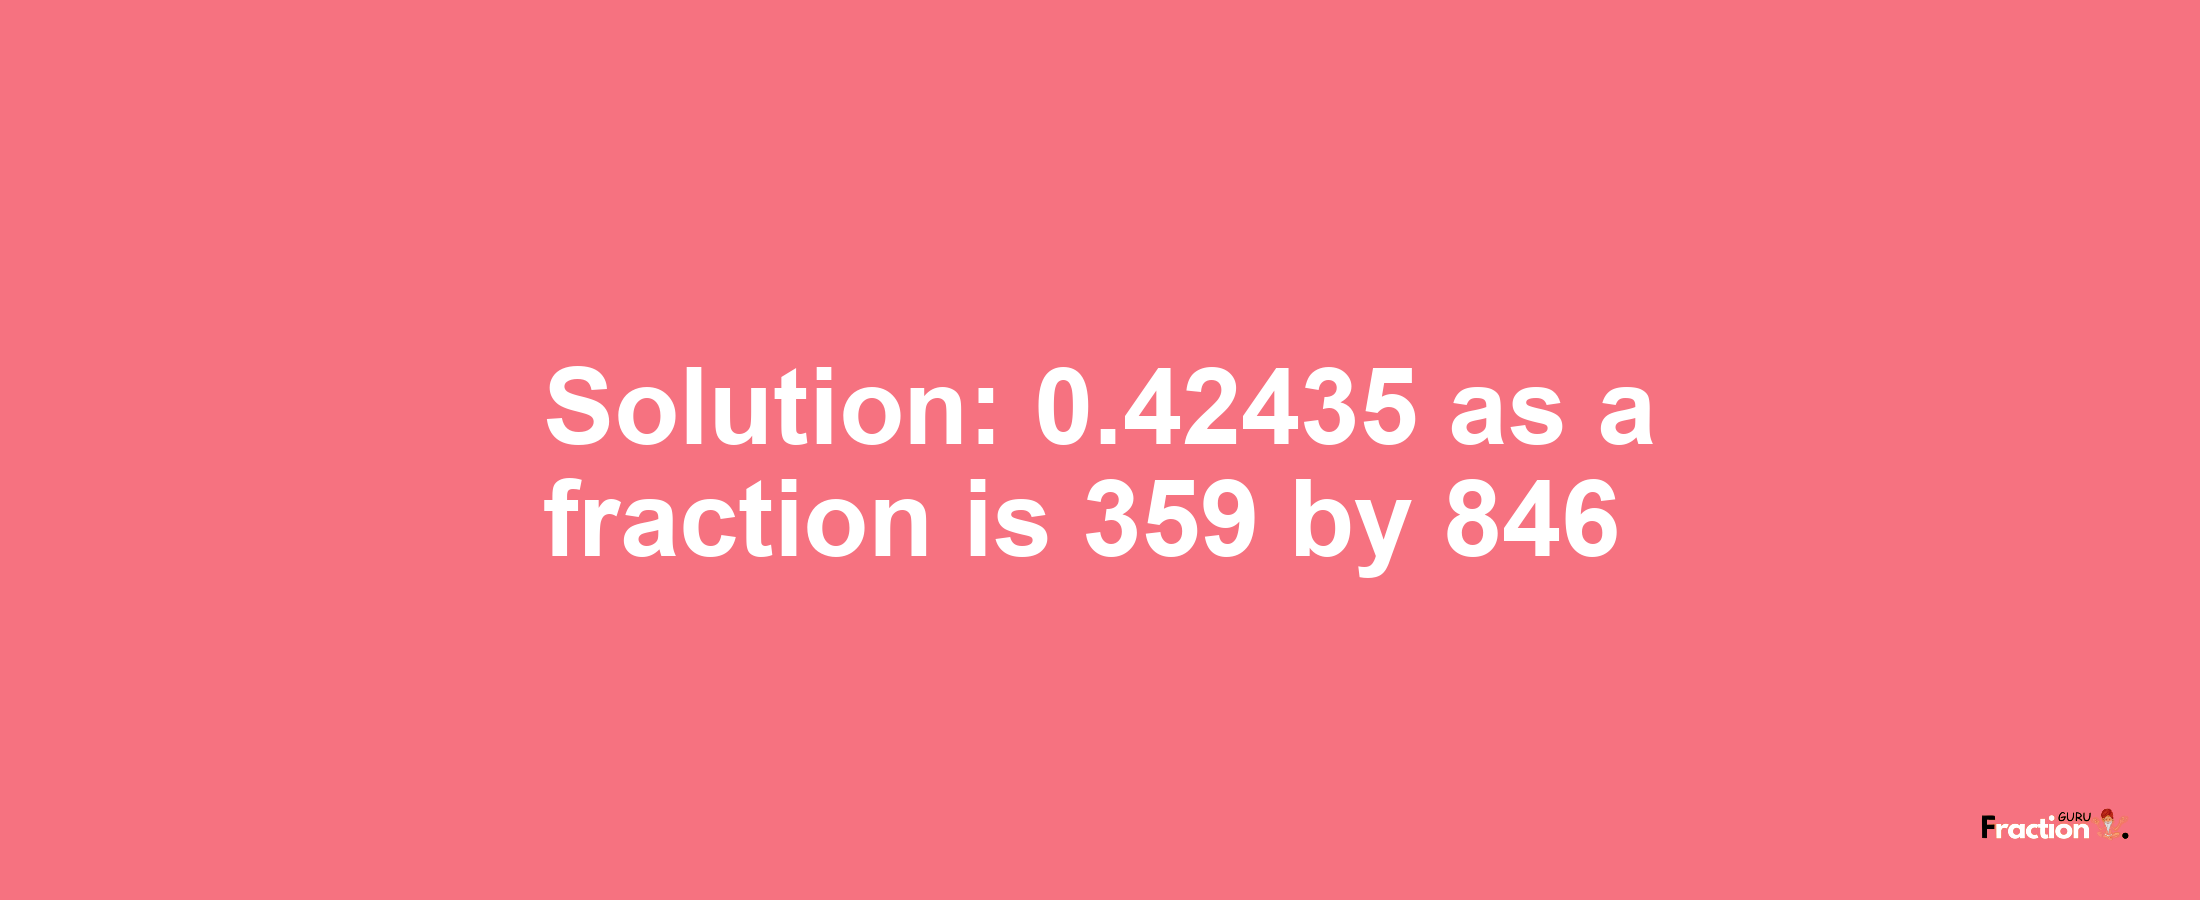 Solution:0.42435 as a fraction is 359/846